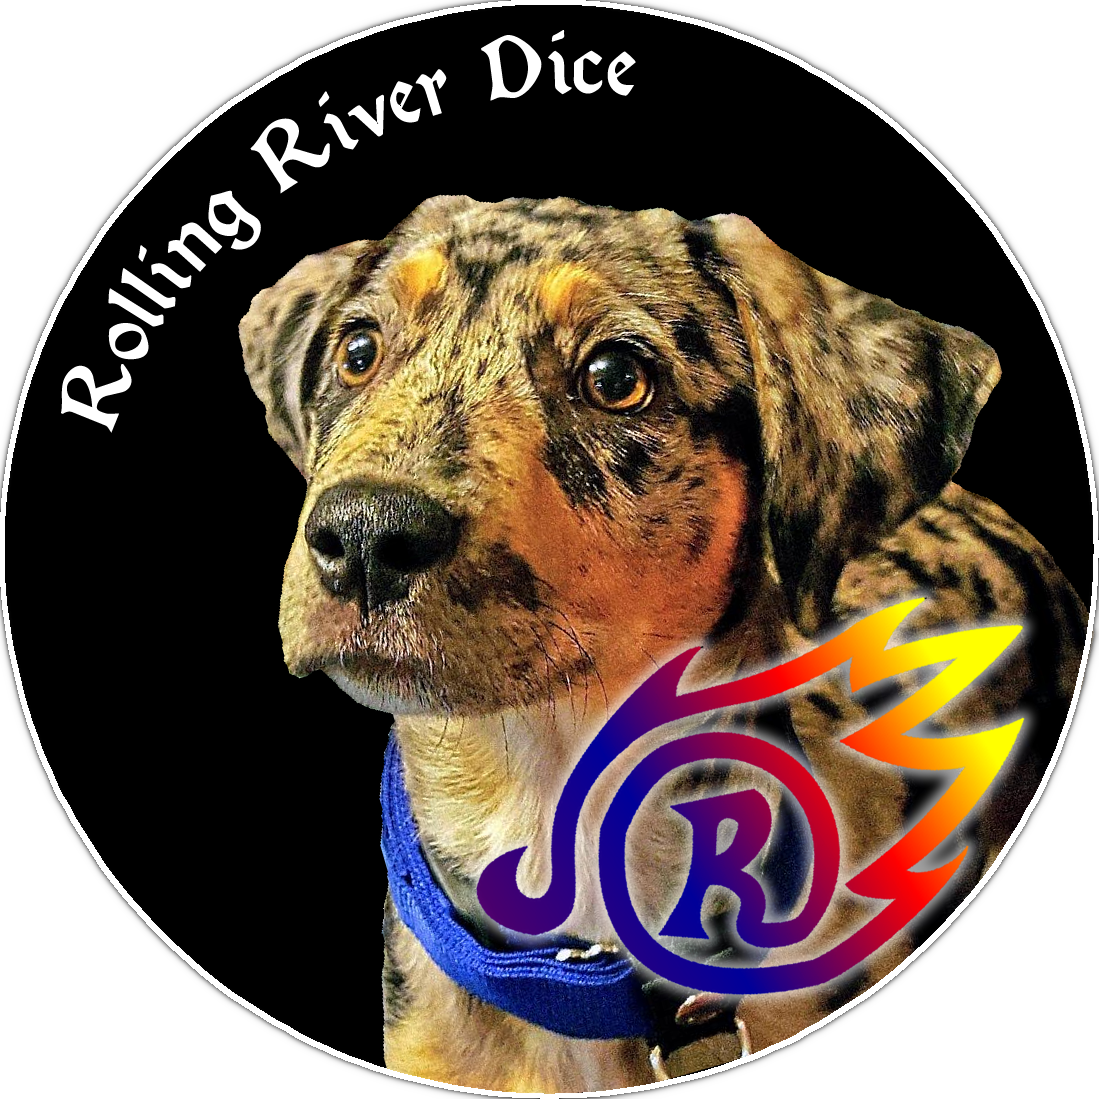 River the dog.